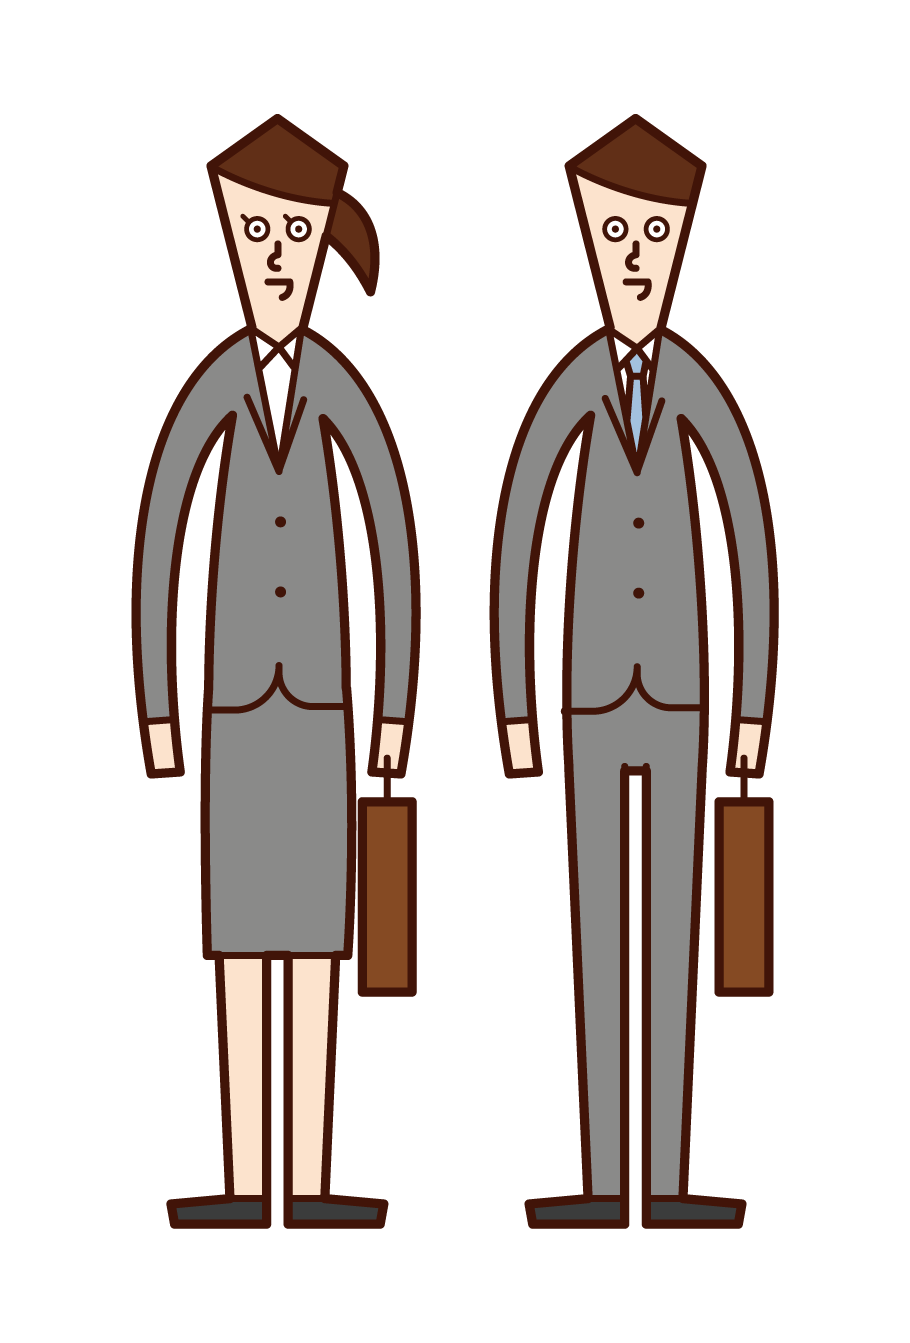 Illustration of wife of full-time husband (man) and office worker (woman)